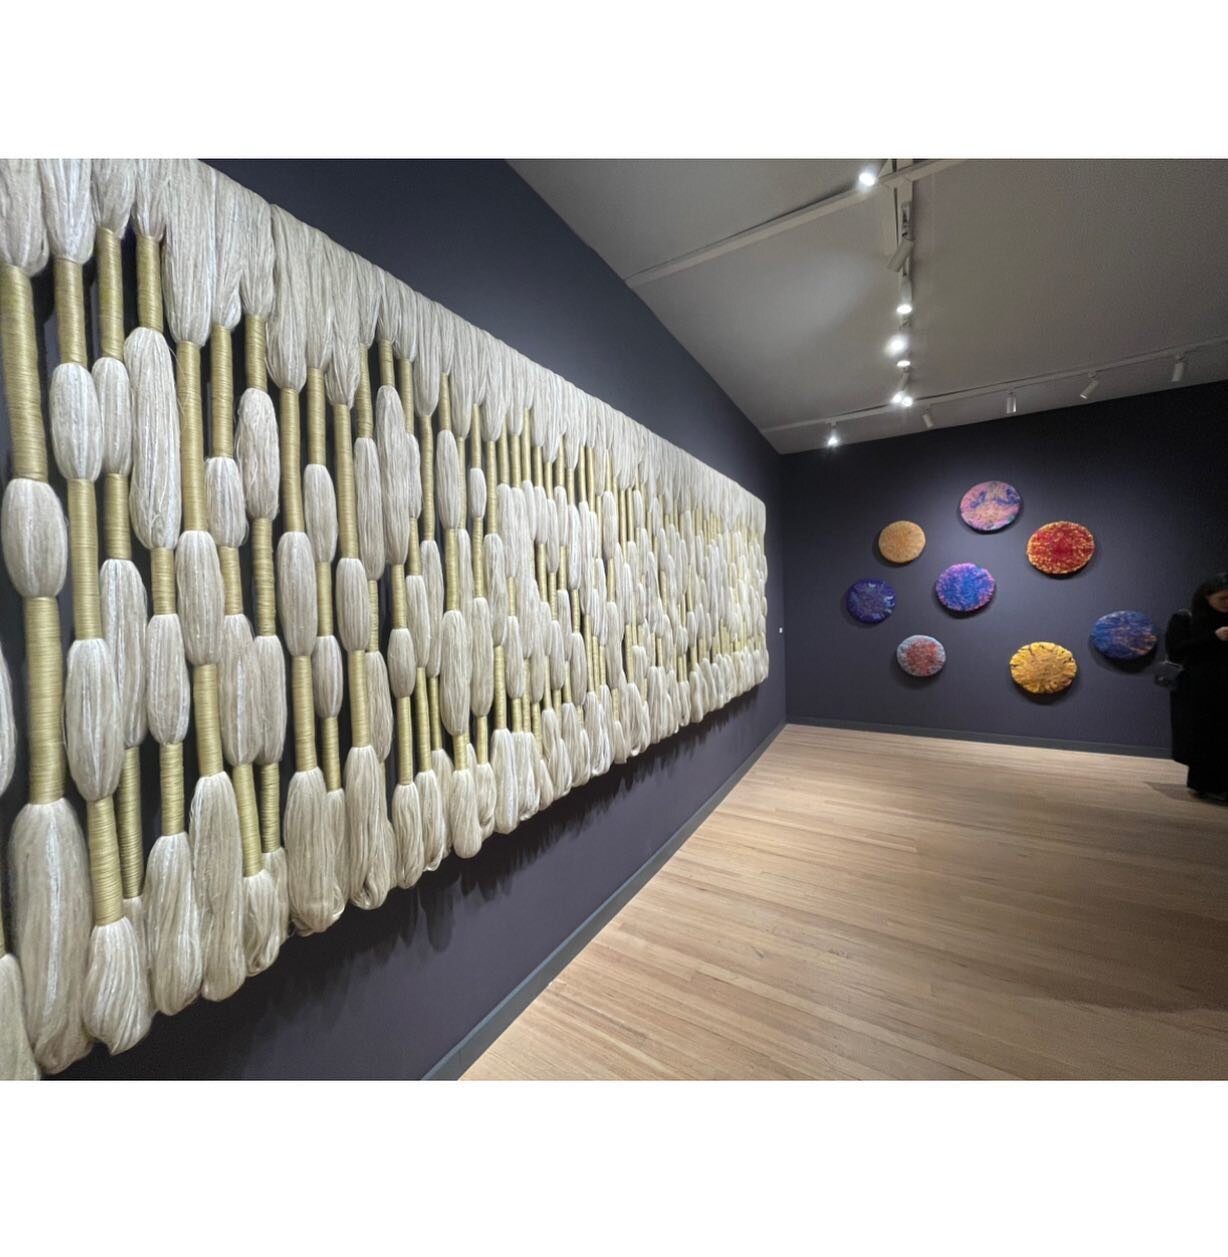 Opening night of the ADAA&rsquo;s The Art Show at the Park Avenue Armory and there was plenty to see. ⁣
⁣
The fair is on view through Sunday, November 5⁣
⁣
Images: ⁣
1. Sheila Hicks installation at Sikkema Jenkins⁣
⁣
2. Bertozzi &amp; Casoni ceramic 